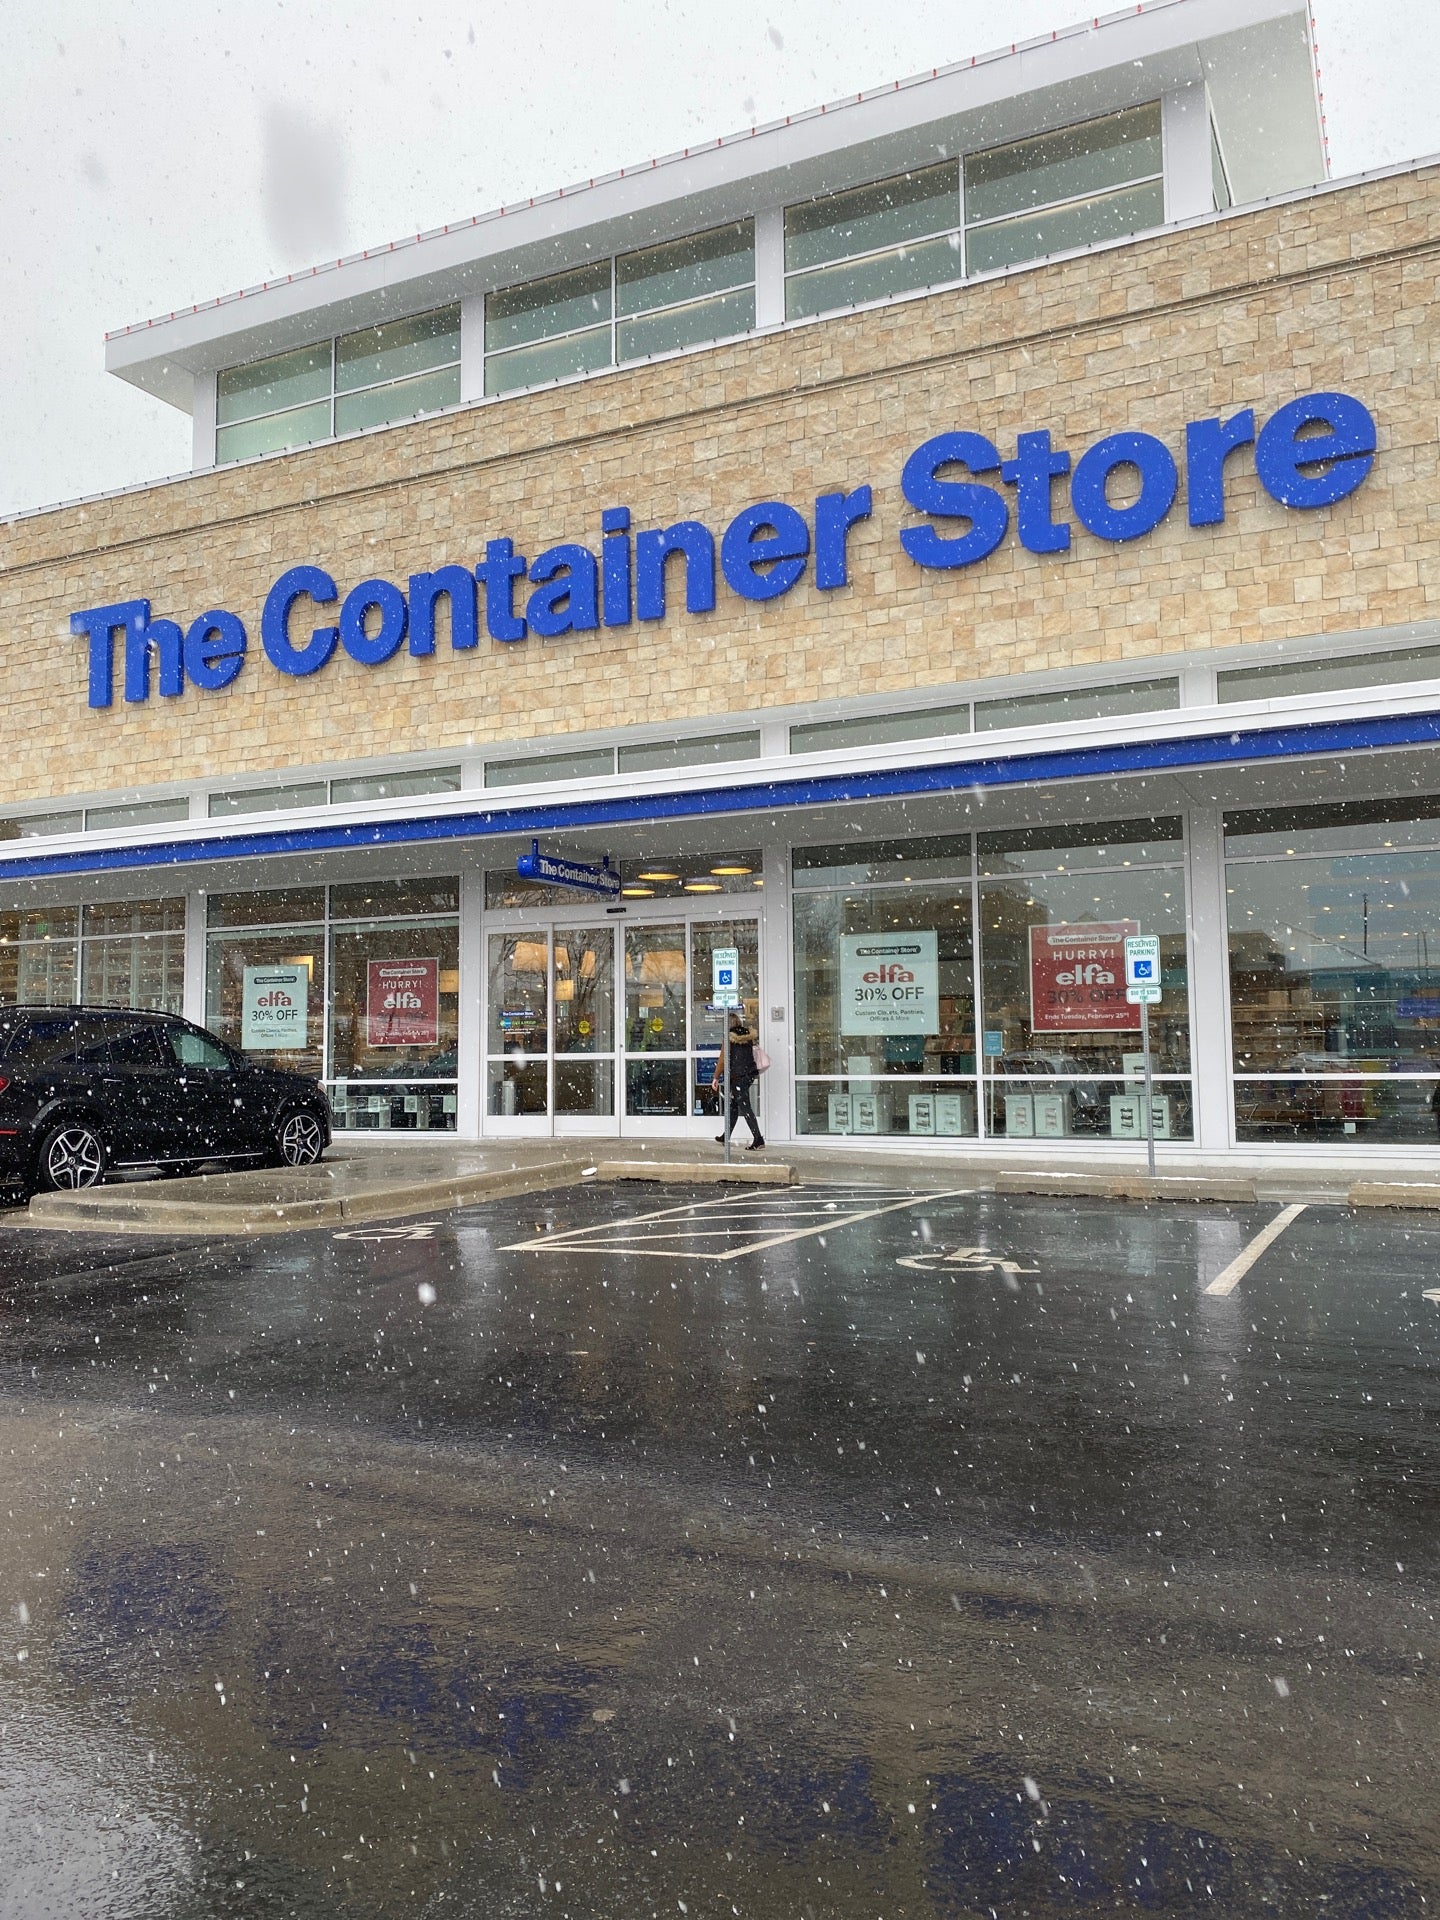 THE CONTAINER STORE - 20 Photos & 17 Reviews - 4701 W 119th St, Overland  Park, Kansas - Home Organization - Phone Number - Yelp